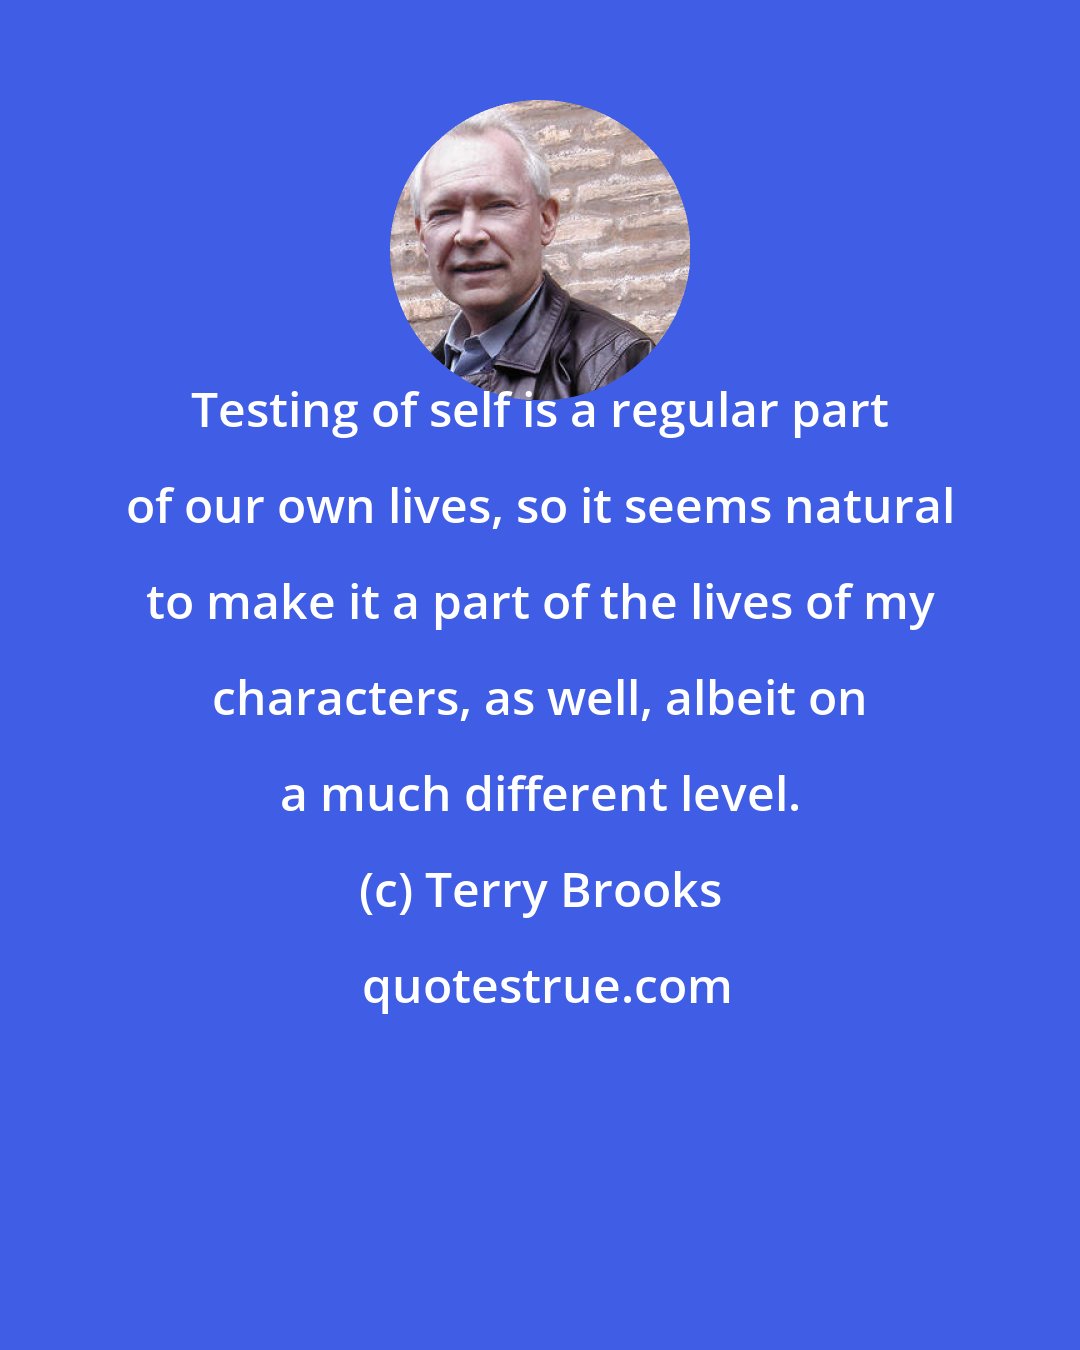 Terry Brooks: Testing of self is a regular part of our own lives, so it seems natural to make it a part of the lives of my characters, as well, albeit on a much different level.